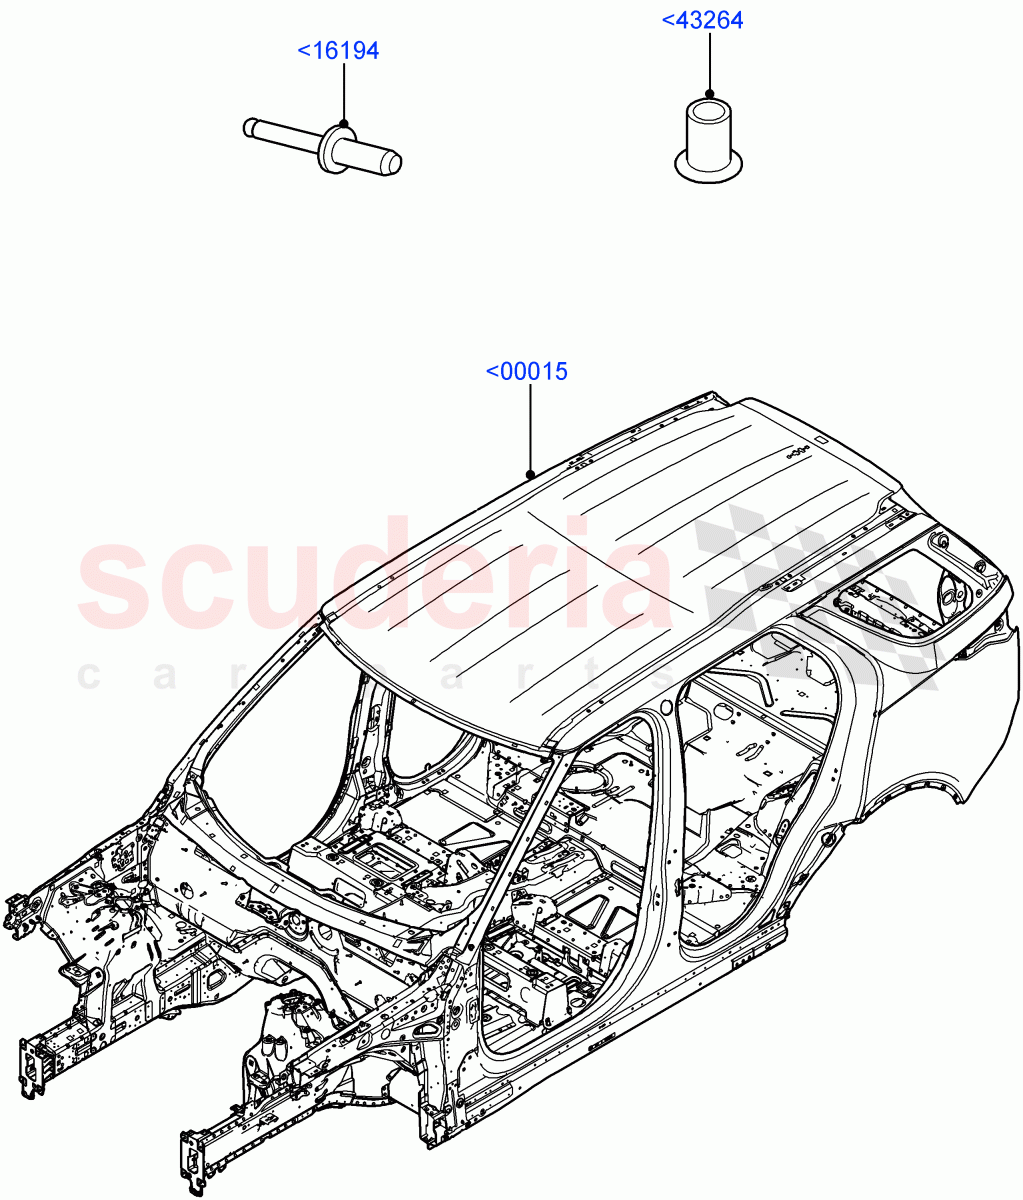 Bodyshell(Nitra Plant Build)((V)FROMK2000001) of Land Rover Land Rover Discovery 5 (2017+) [3.0 Diesel 24V DOHC TC]